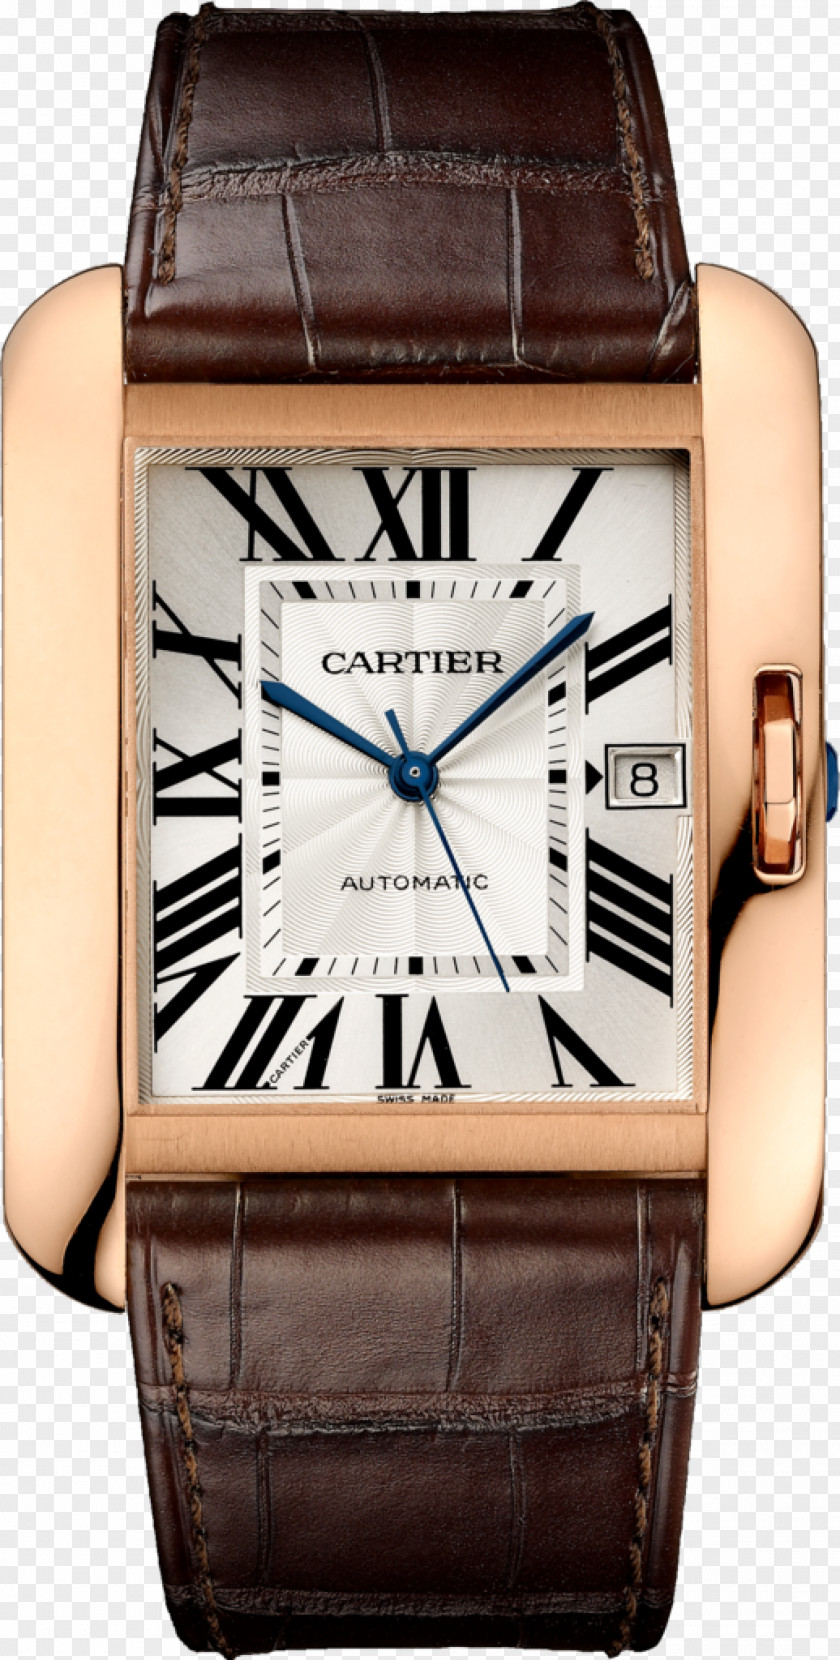 Watch Cartier Tank Automatic Jewellery PNG